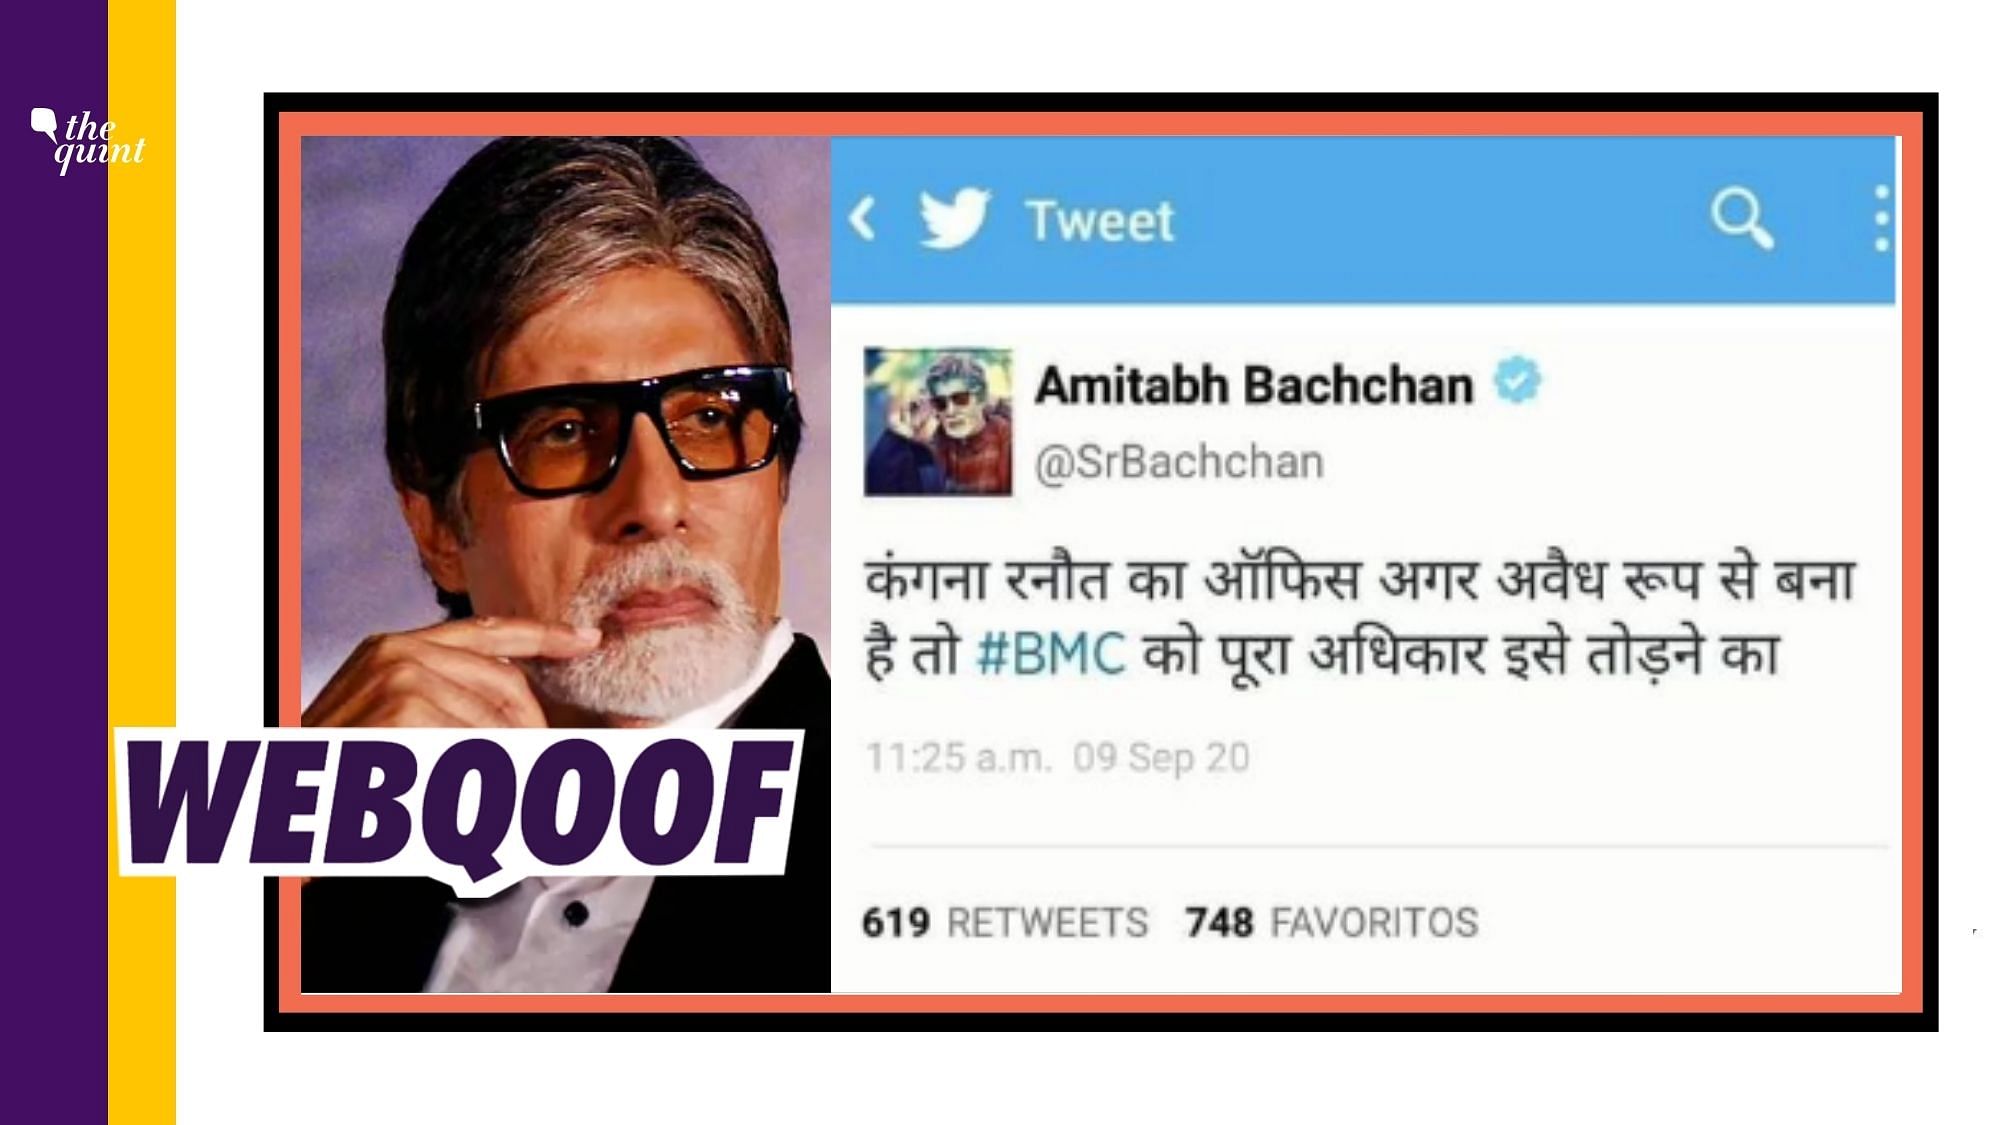 A fake tweet is being widely circulated to falsely claim that Amitabh Bachchan has shared it and commented on demolition carried out by BMC officials.